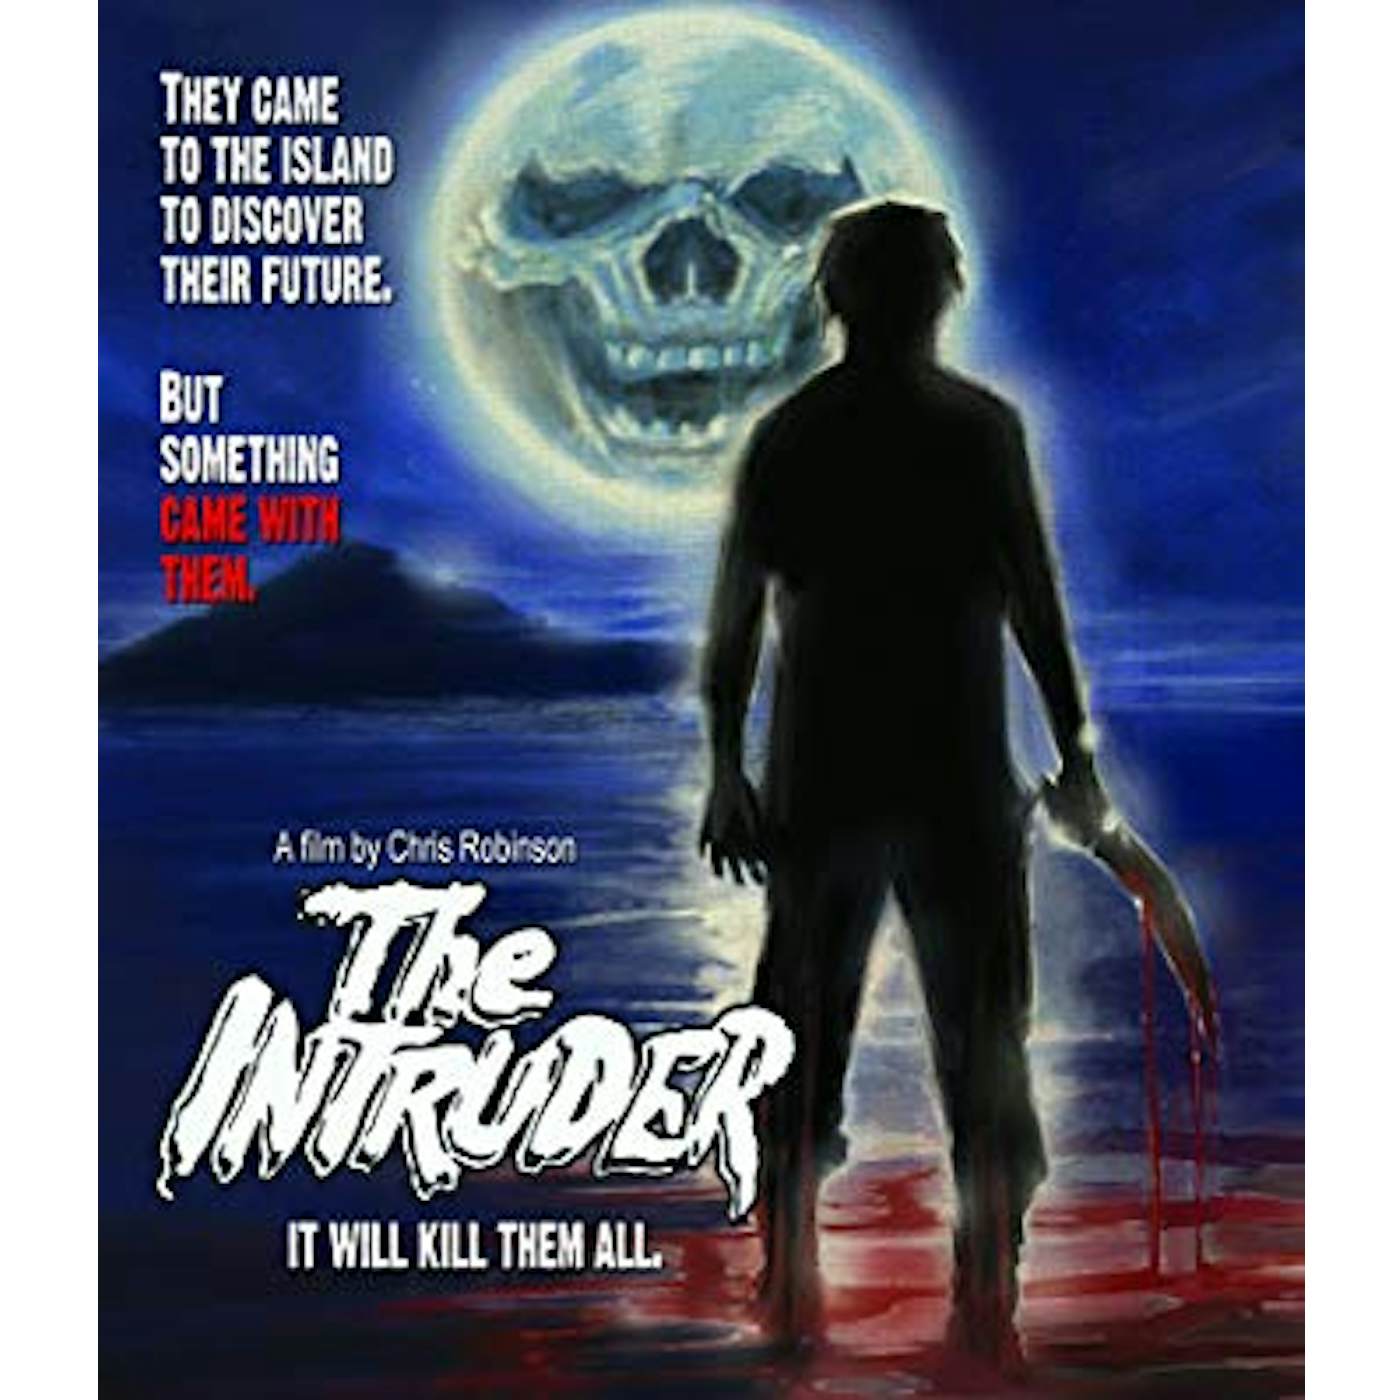 Official: Intruders